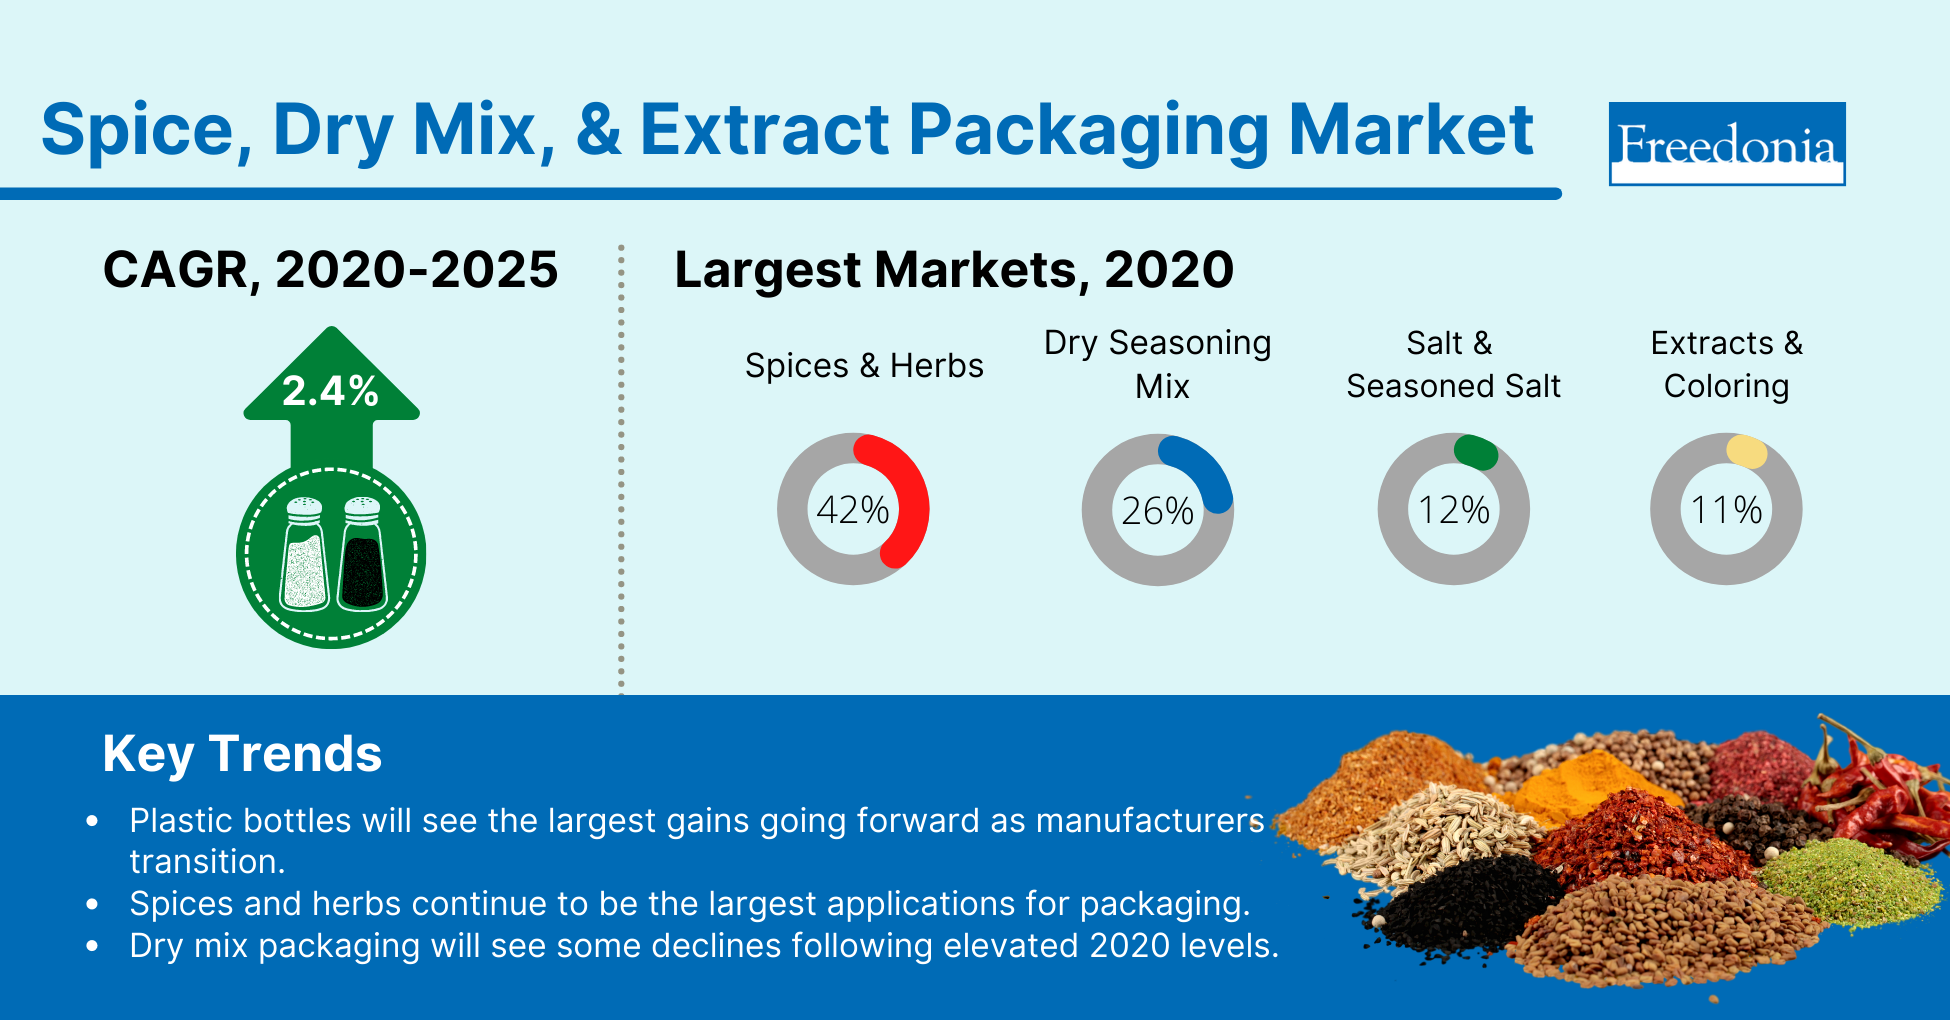 Infographic with Top Markets and Key Trends for Spices, Dry Mixes, and Extracts Packaging